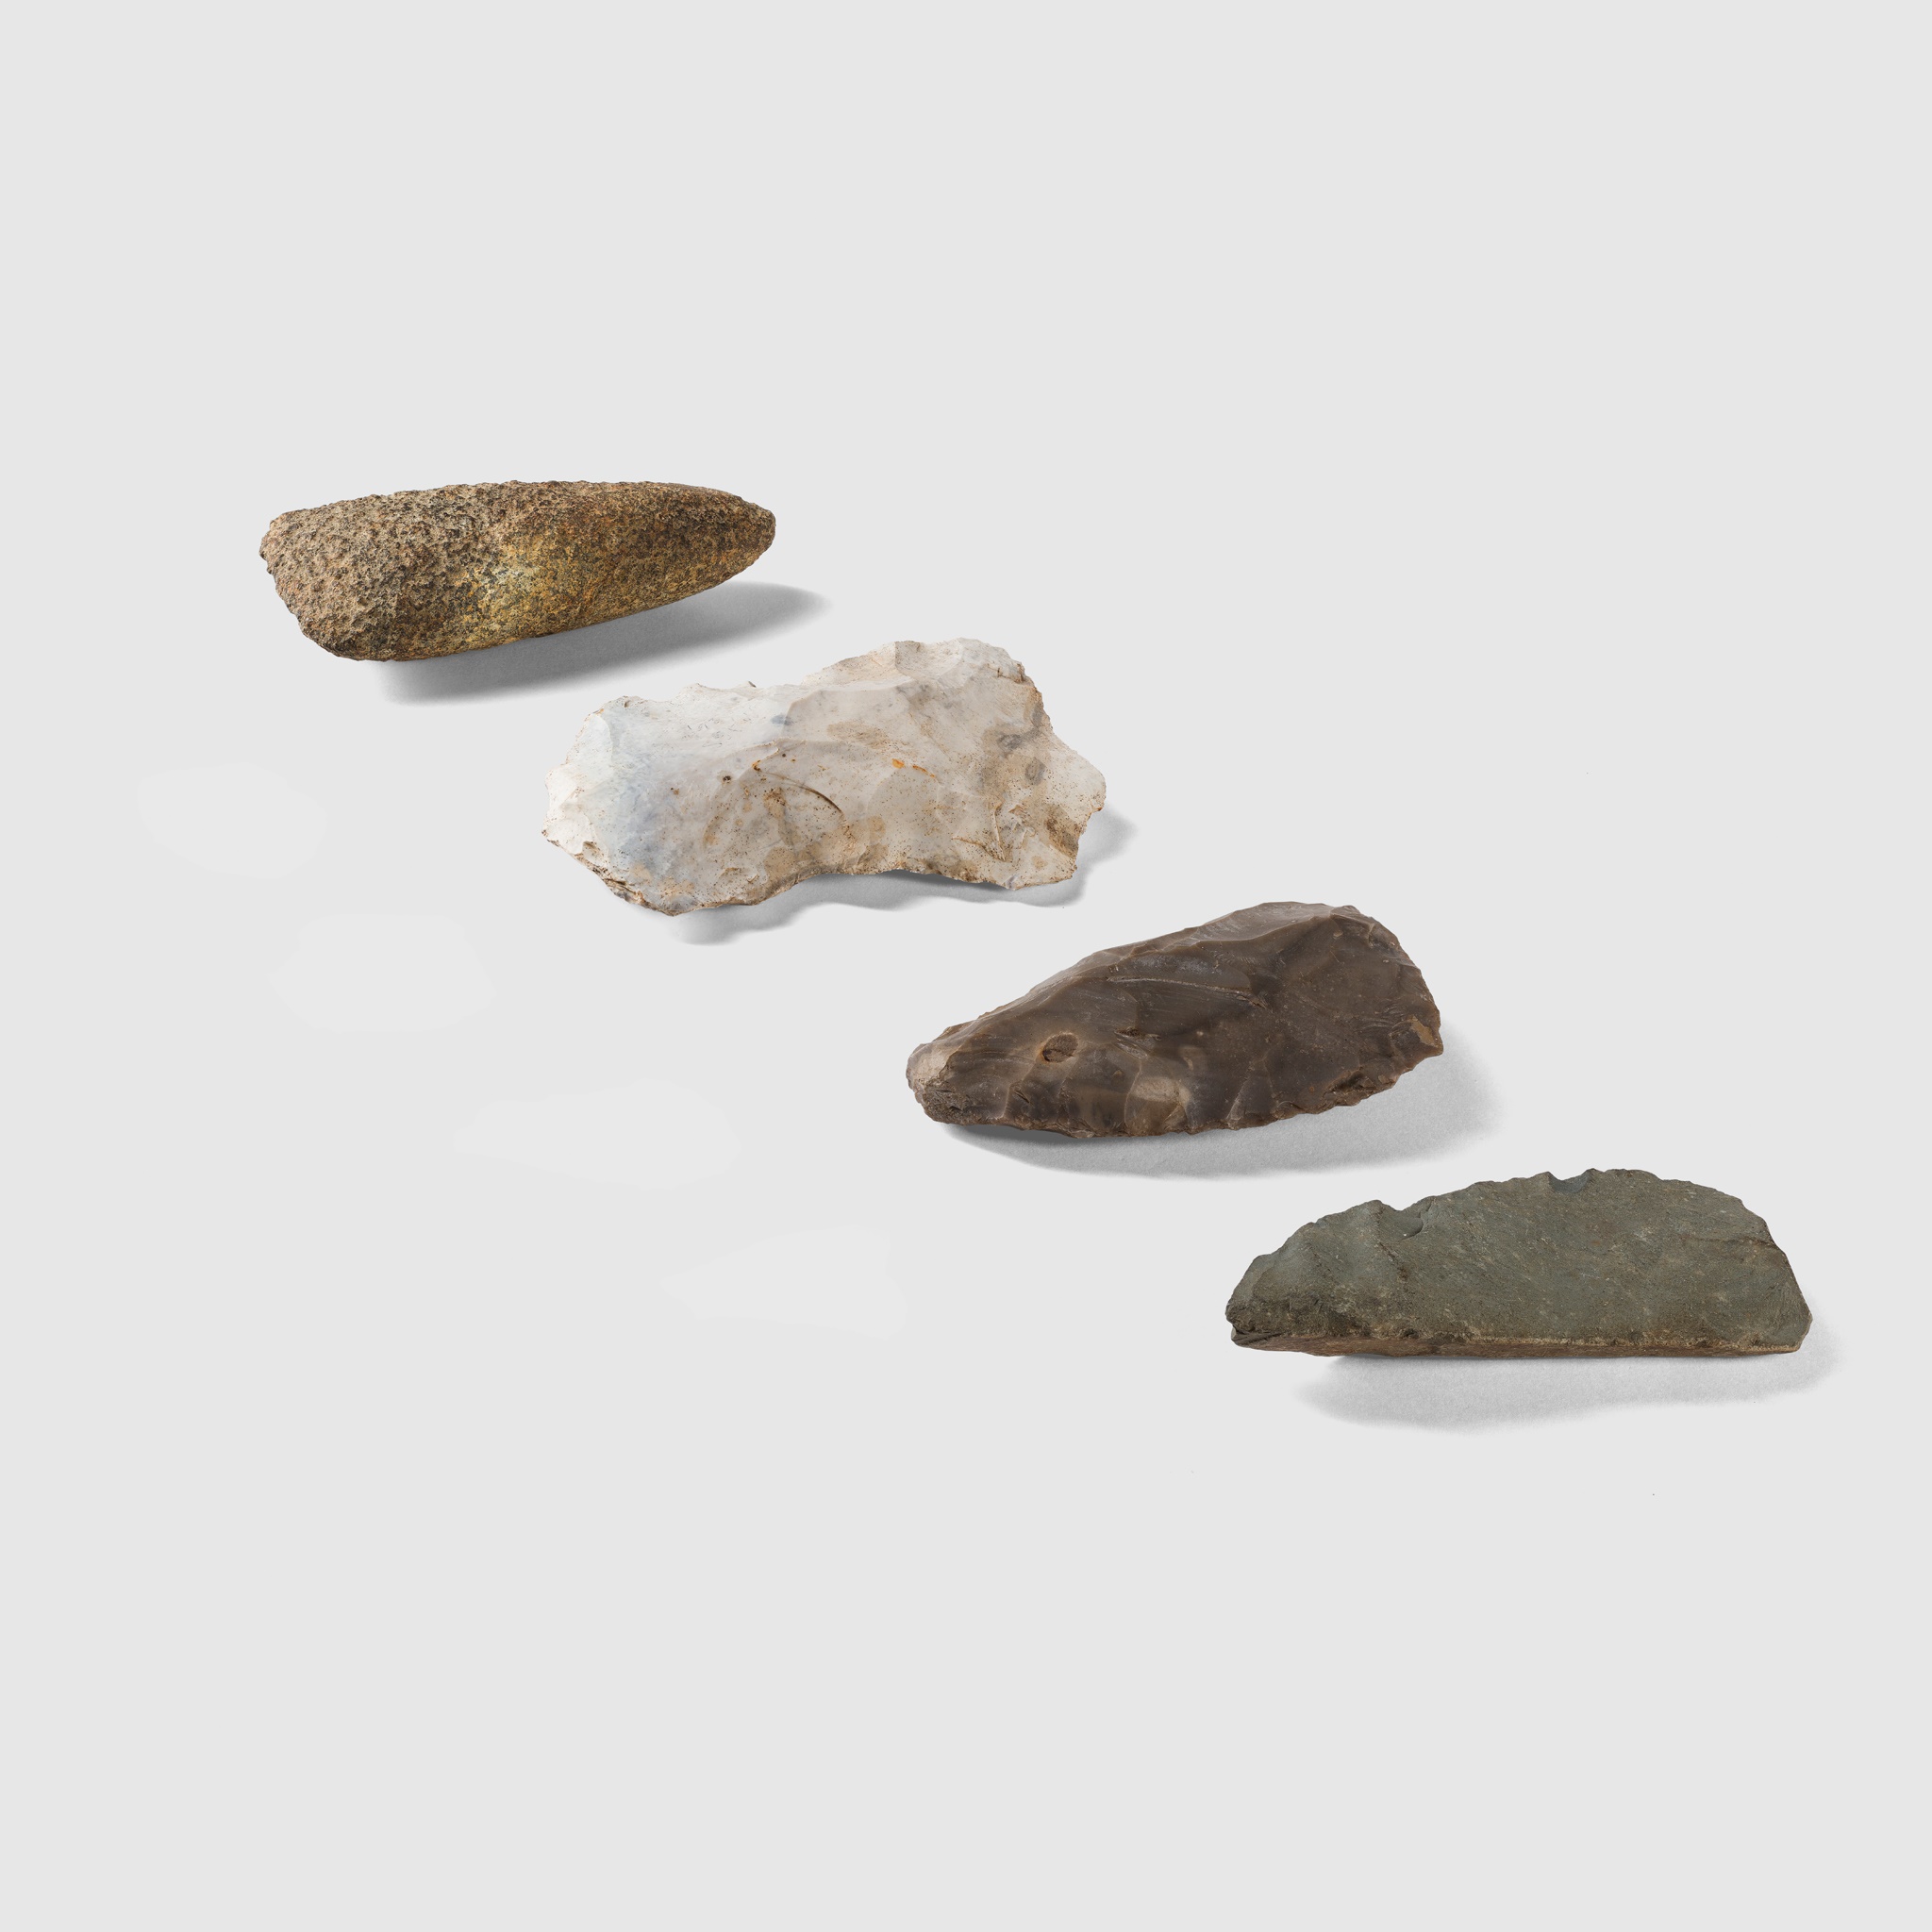 COLLECTION OF NEOLITHIC TOOLS WESTERN EUROPE, 3RD MILLENIUM B.C. - Image 2 of 4